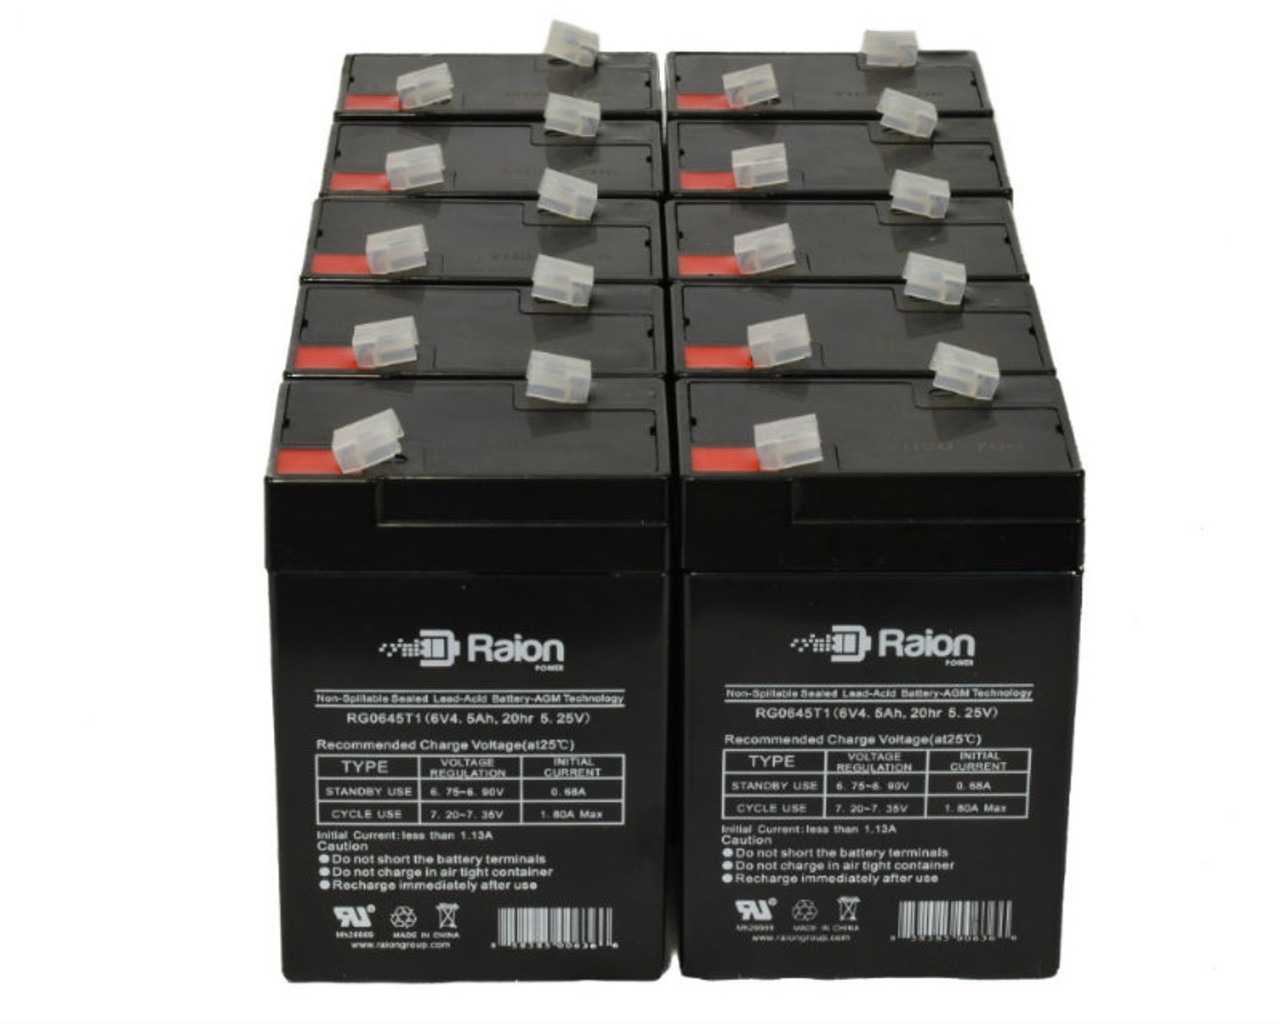 Raion Power 6V 4.5Ah Replacement Emergency Light Battery for Big Beam 2IQ6S50 - 10 Pack